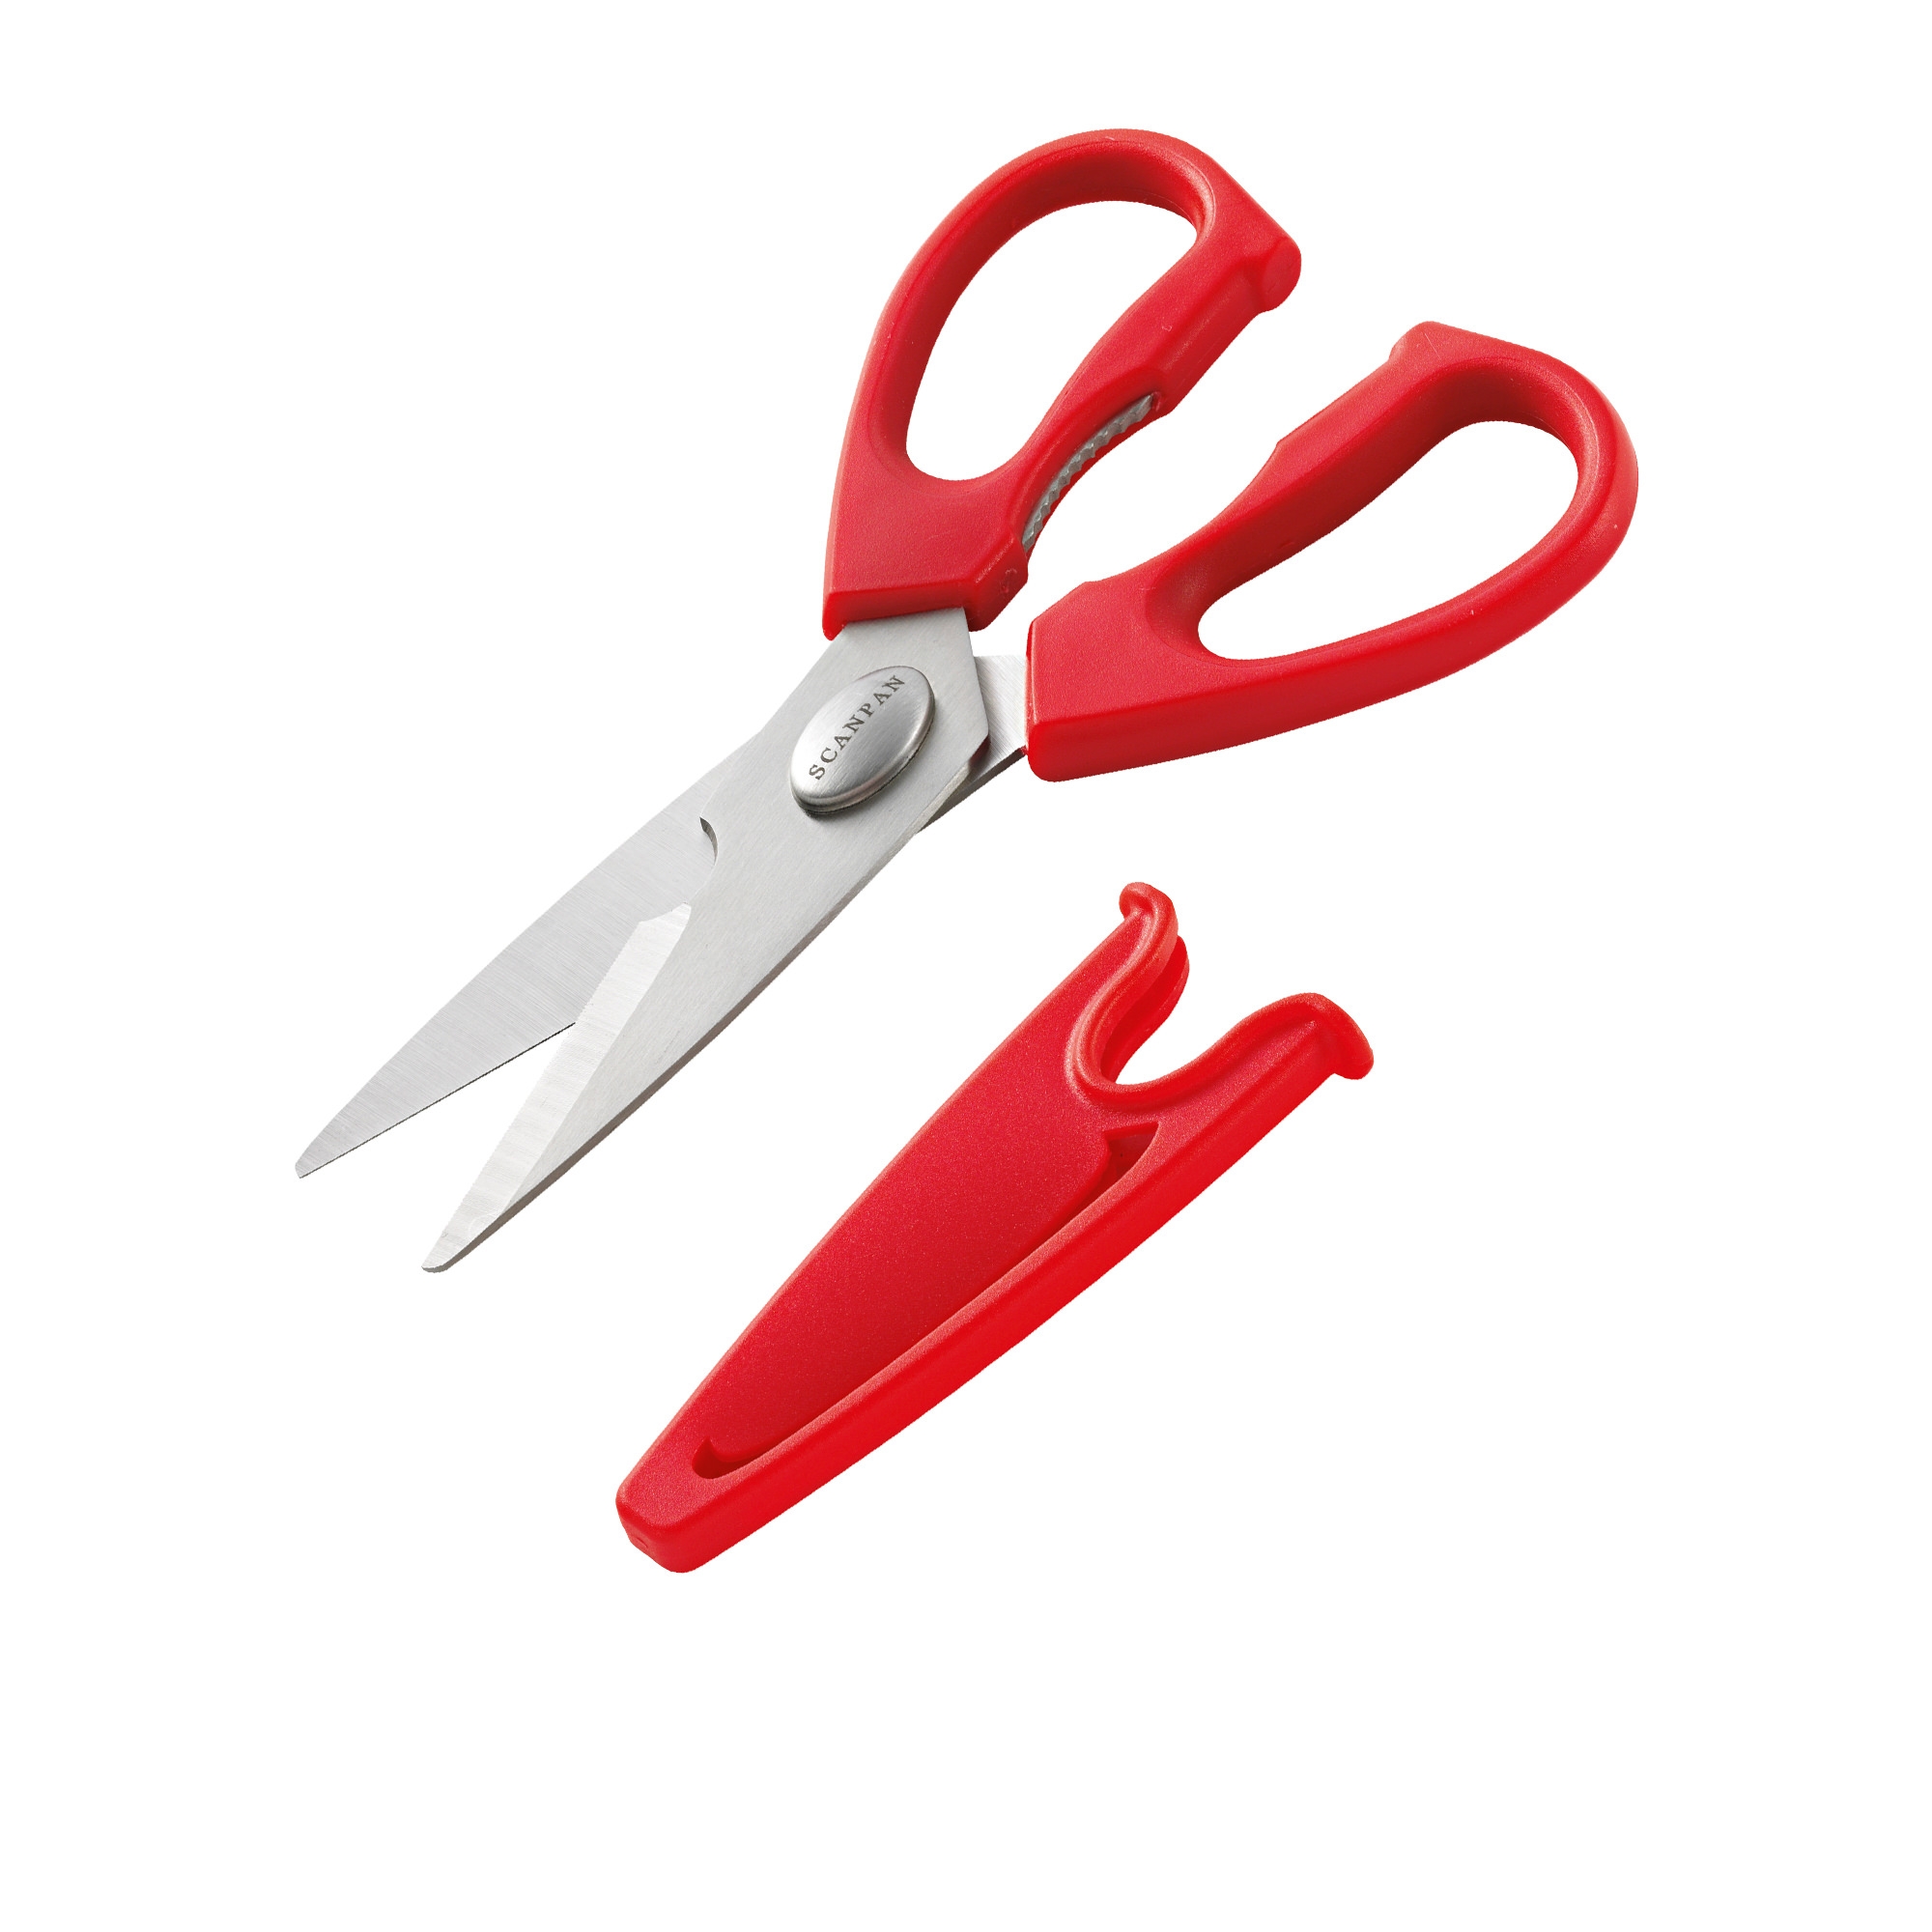 Scanpan Spectrum Soft Touch Kitchen Shears Red Image 1